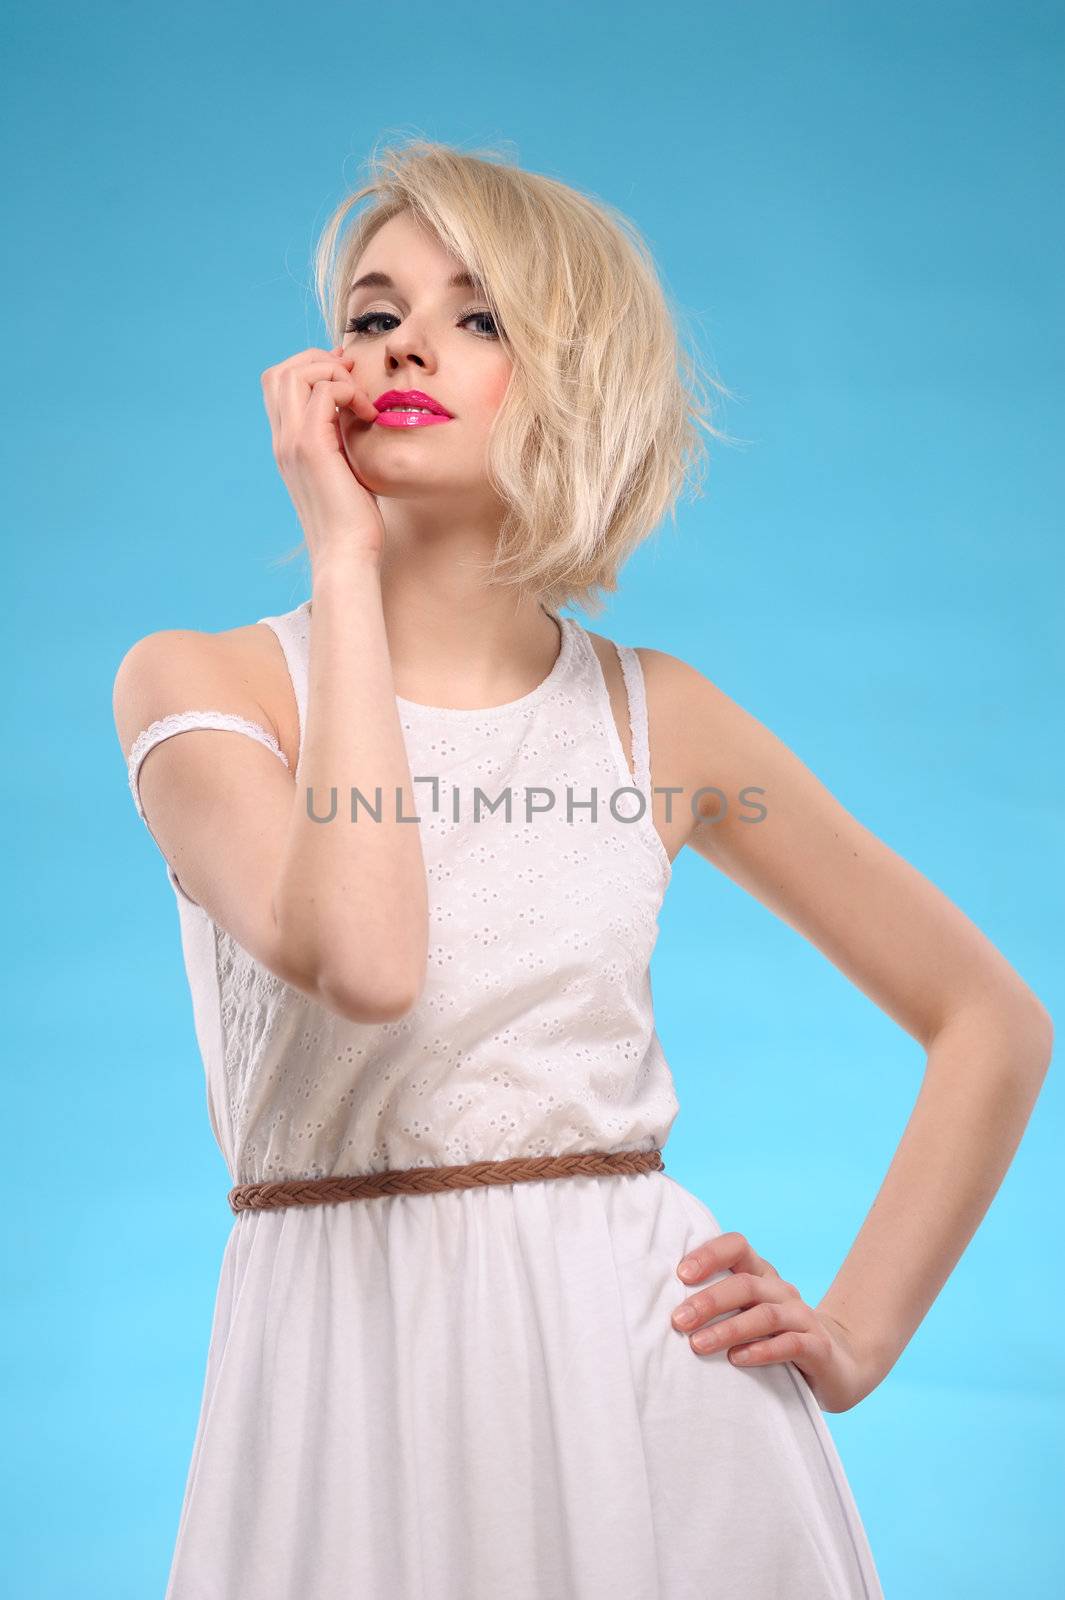 Sensual portrait of a beautiful blonde hair woman with white dress on blue background